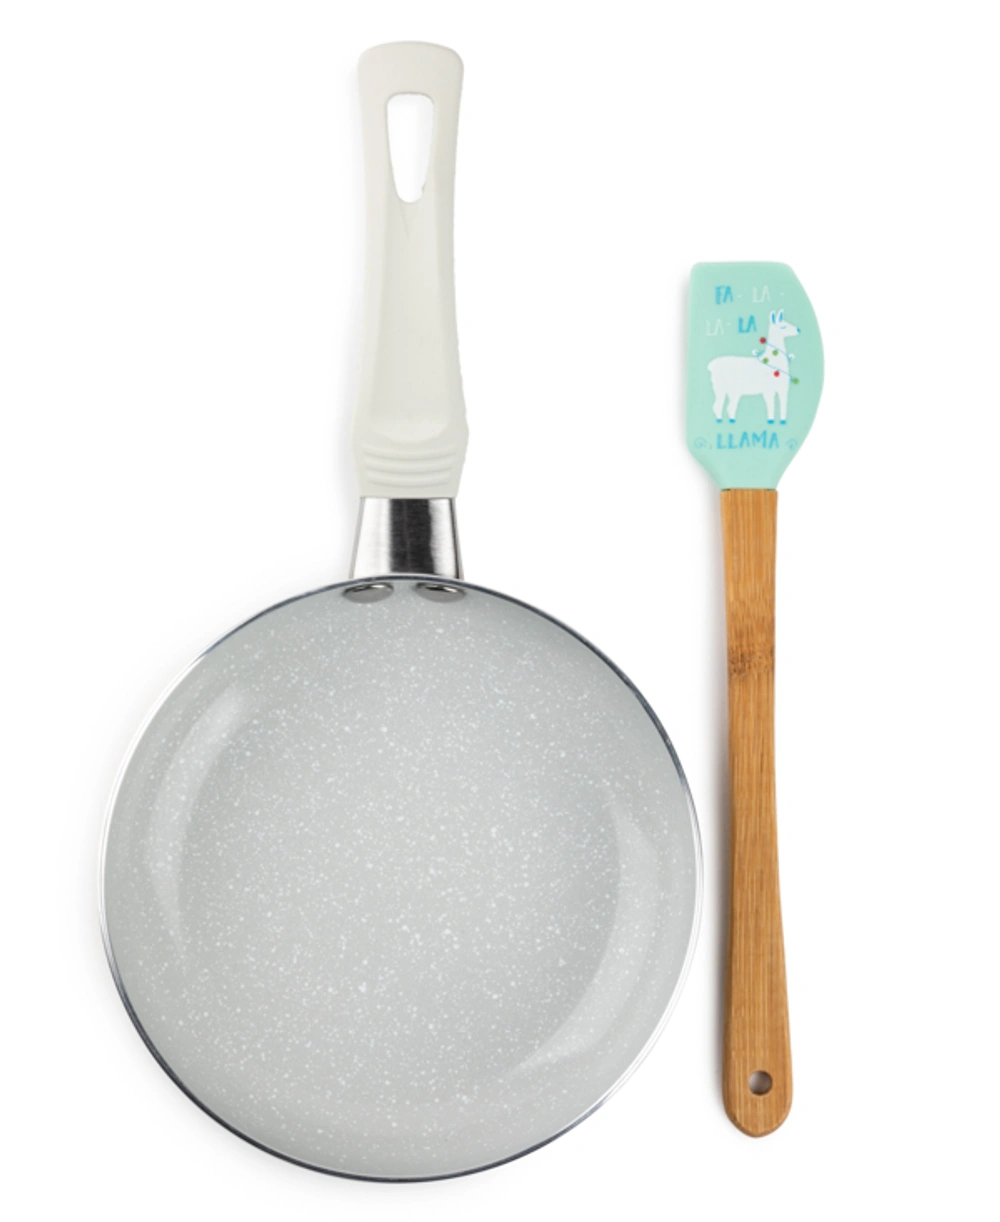  Brooklyn Steel Co. Mini Round Fry Pan & Slotted Turner 2-Pc. Set  - Blue Lapis: Home & Kitchen